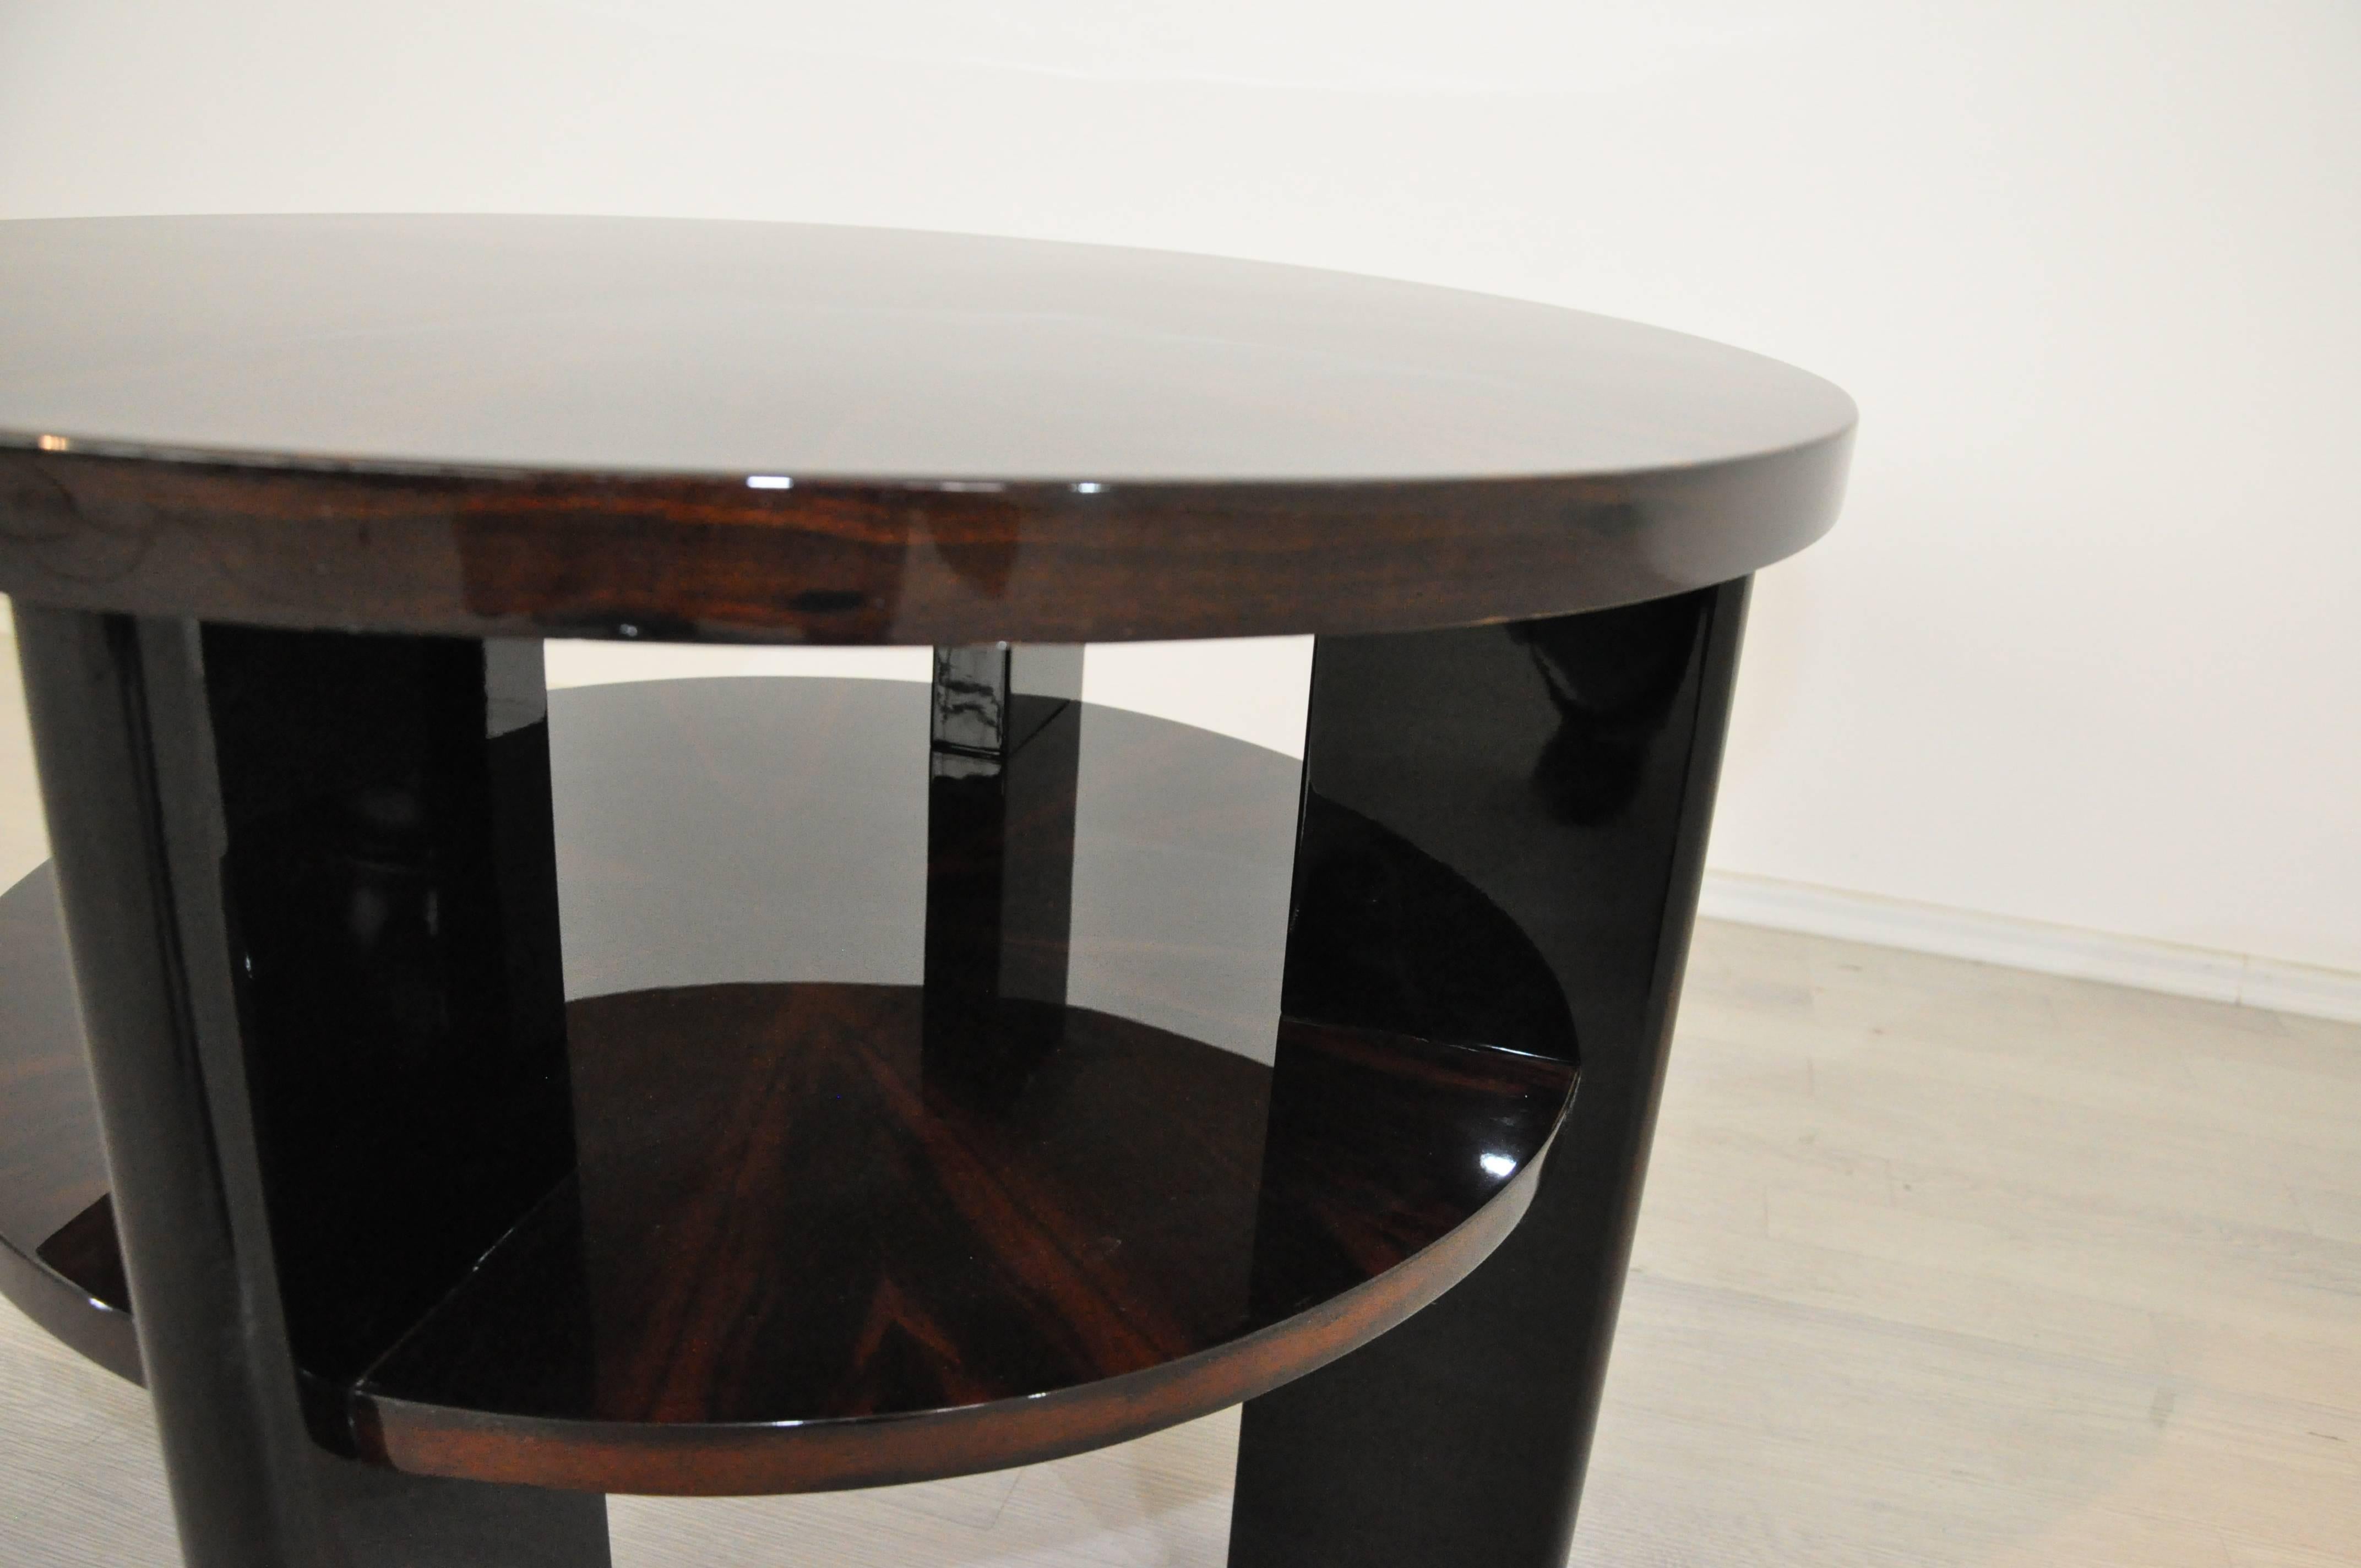 Classic Art Deco table with a simple but elegant design and four rounded legs. The wonderful Macassar veneer is restored with a costly highgloss polish. An eyecatcher for every living environment.

Original French piece from the 1930s
Classic and